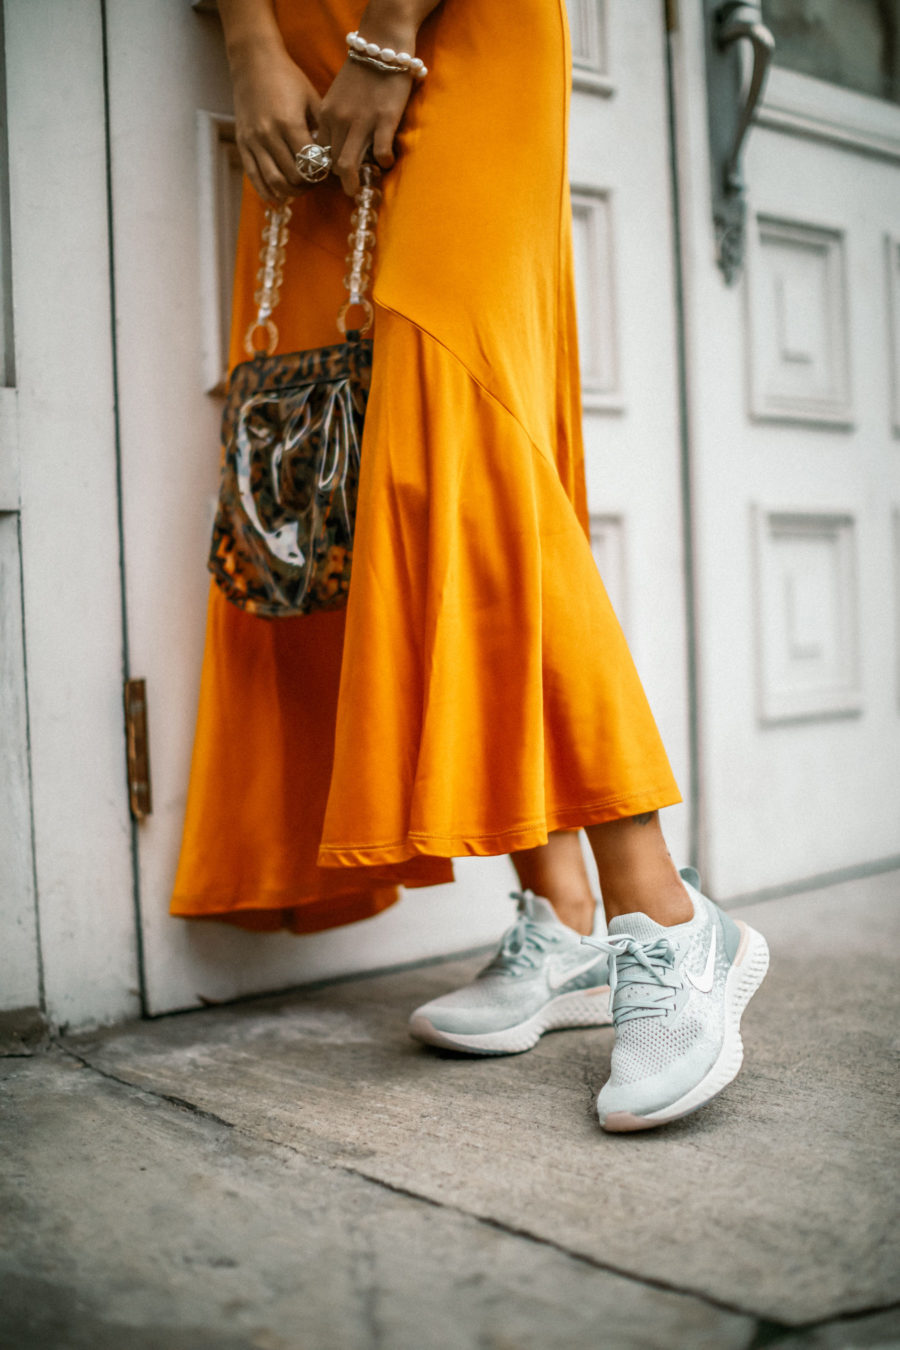 How to Wear Maxi Dresses in the Winter, Maxi dress with sneakers // Notjessfashion.com